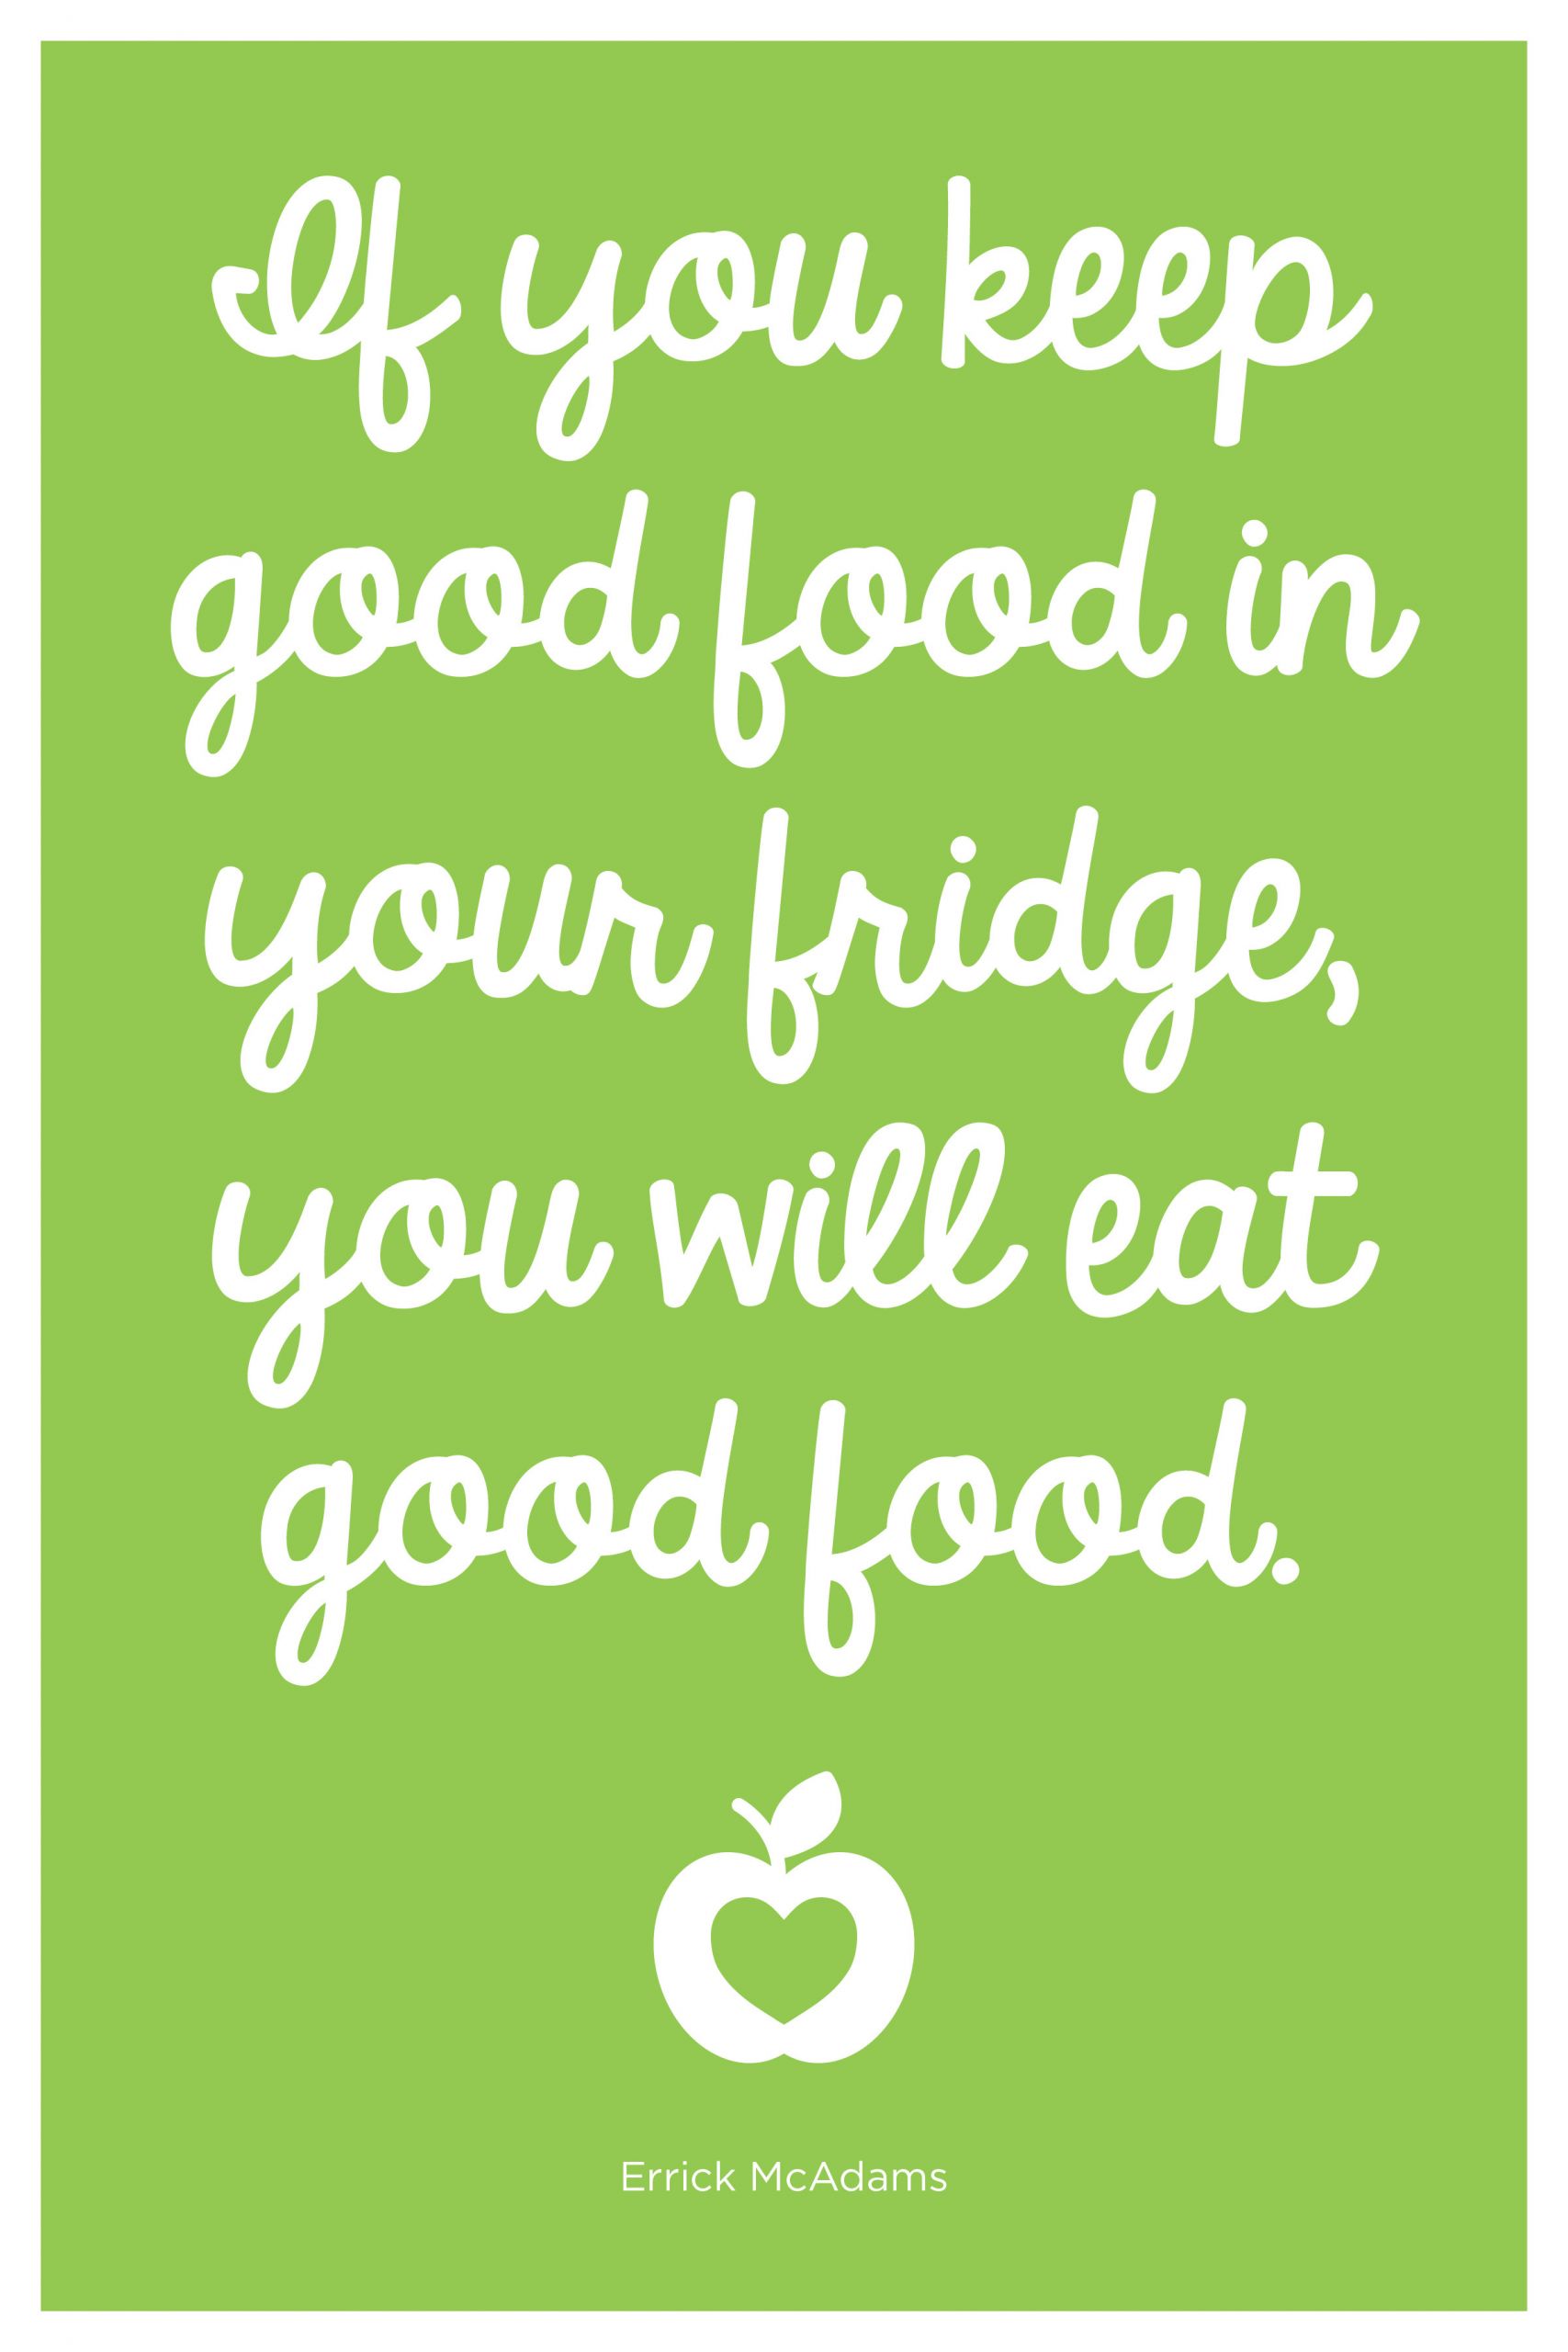 Motivational Food Quotes
 Healthy Lifestyle Quotes QuotesGram